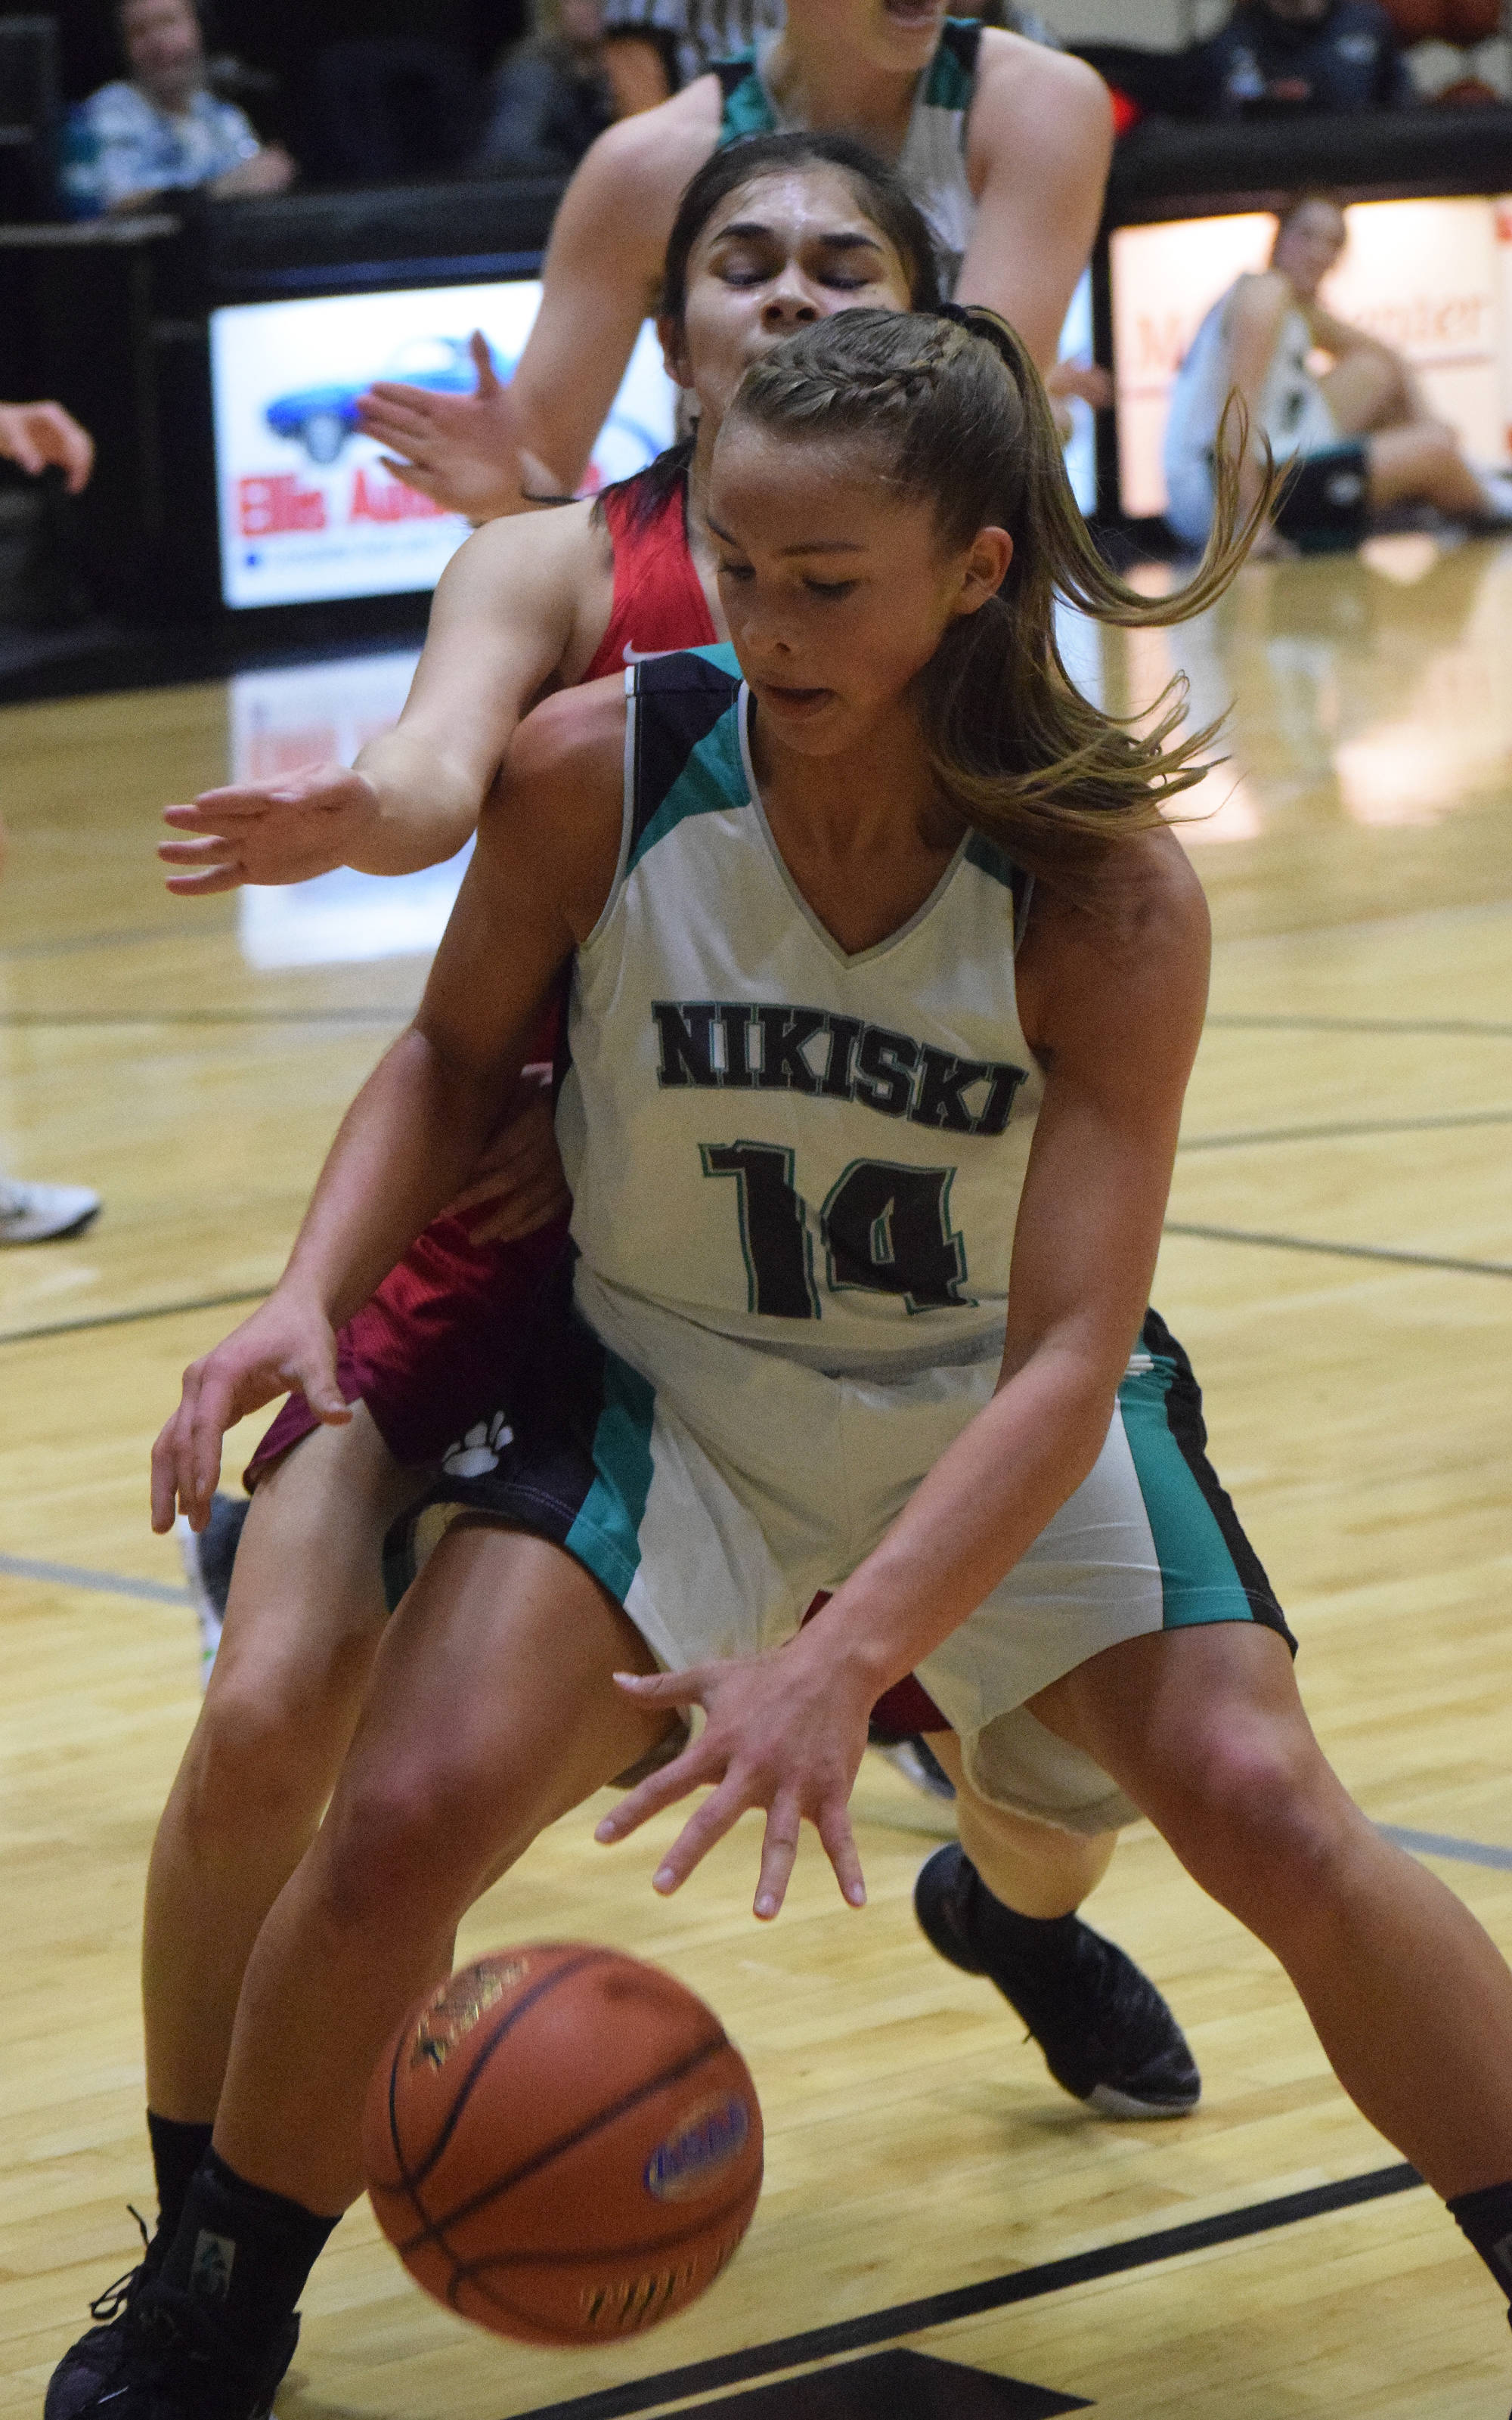 Nikiski’s Kaitlyn Johnson (14) works for space against Anchorage’s Jessie Davis Friday in a Southcentral Conference contest at Nikiski High School. (Photo by Joey Klecka/Peninsula Clarion)